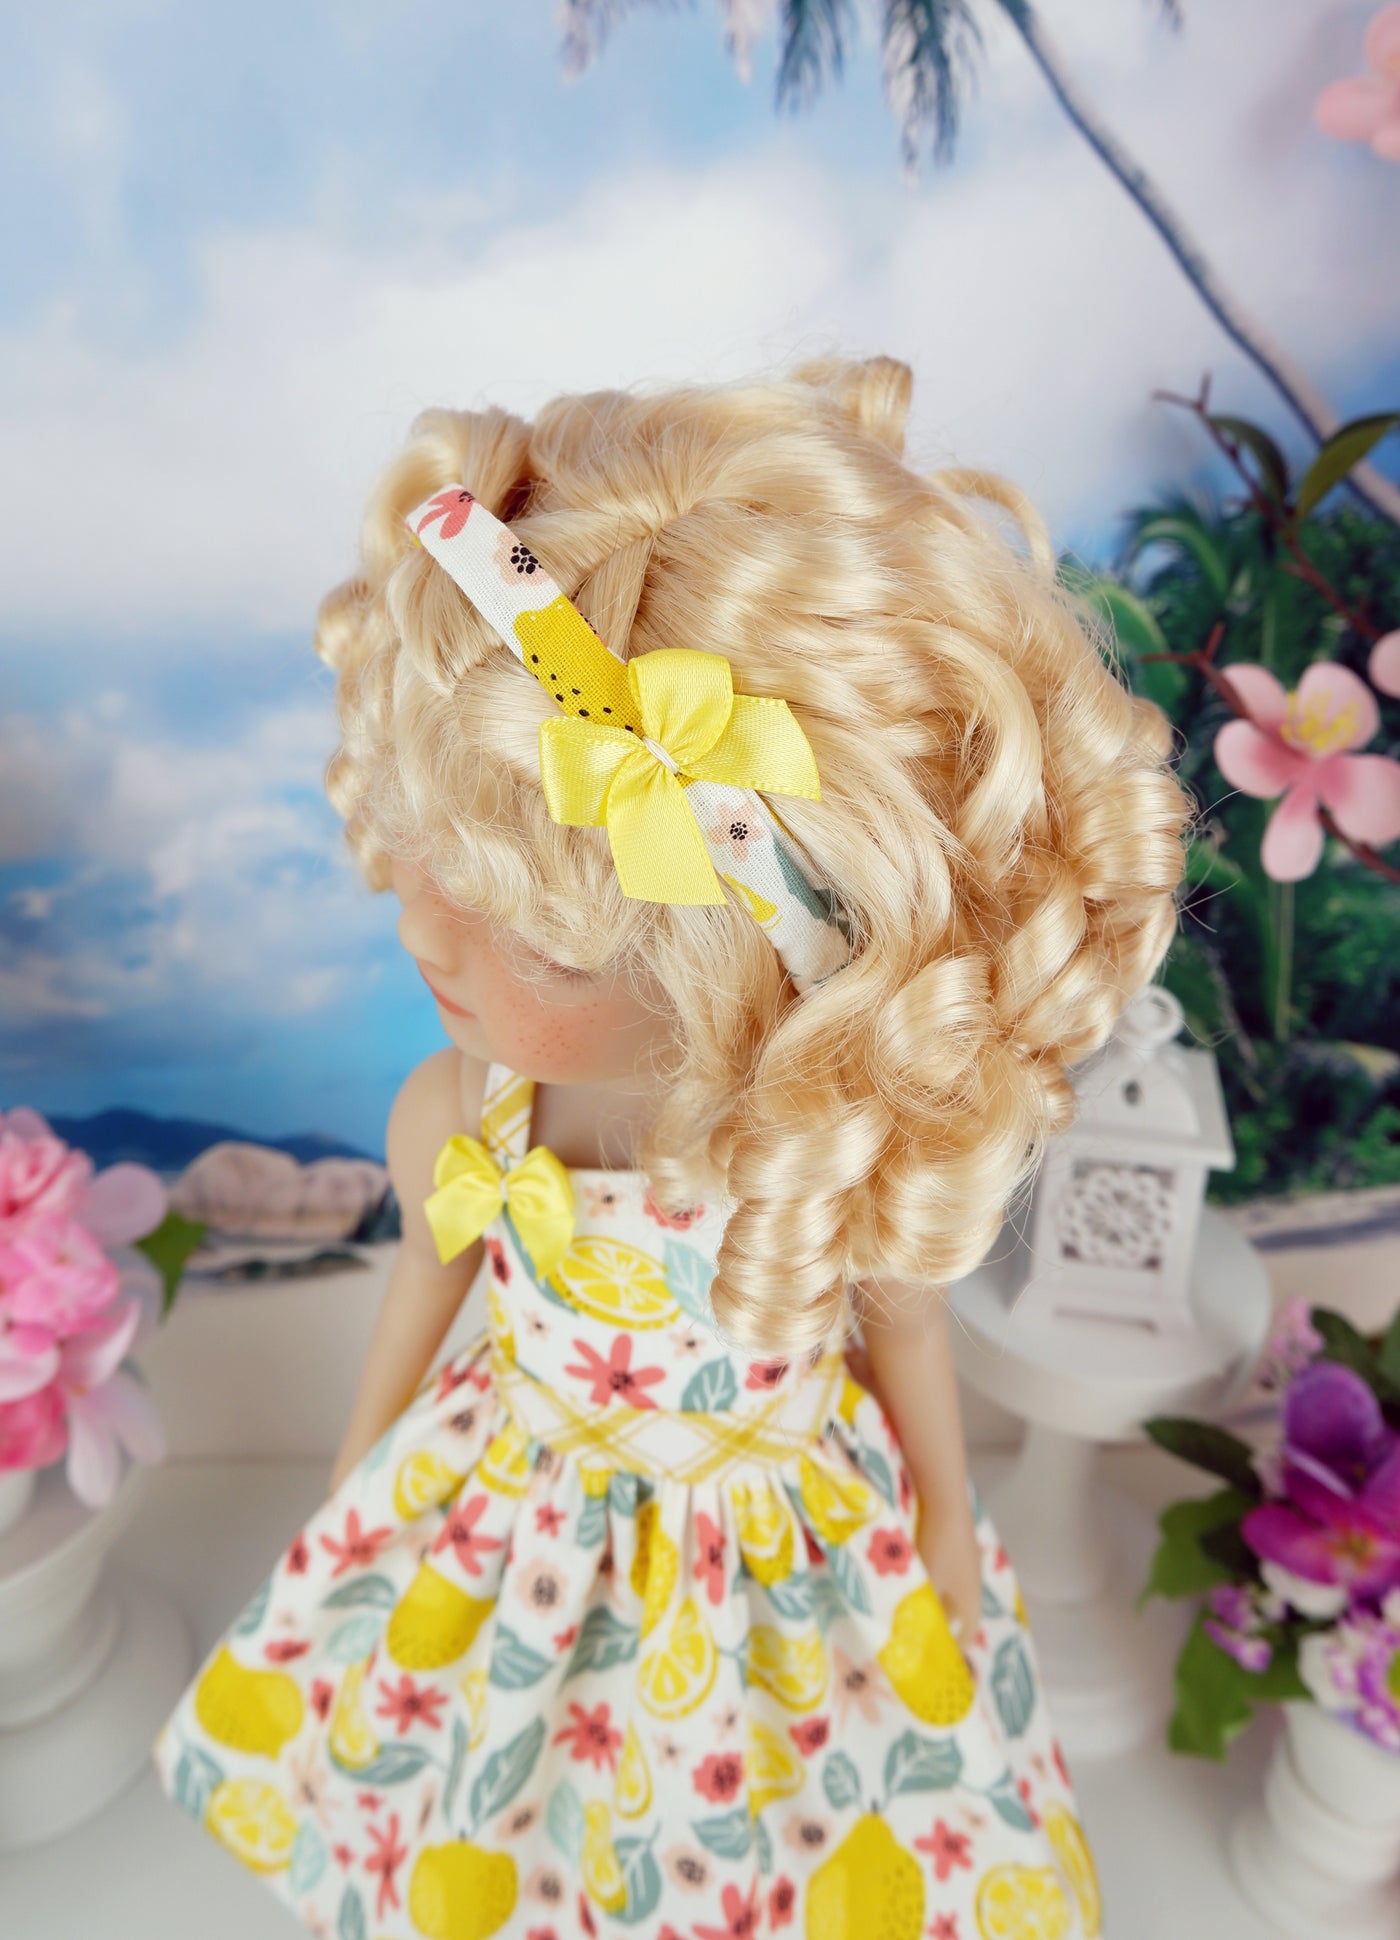 Sweet Lemons - dress with shoes for Ruby Red Fashion Friends doll